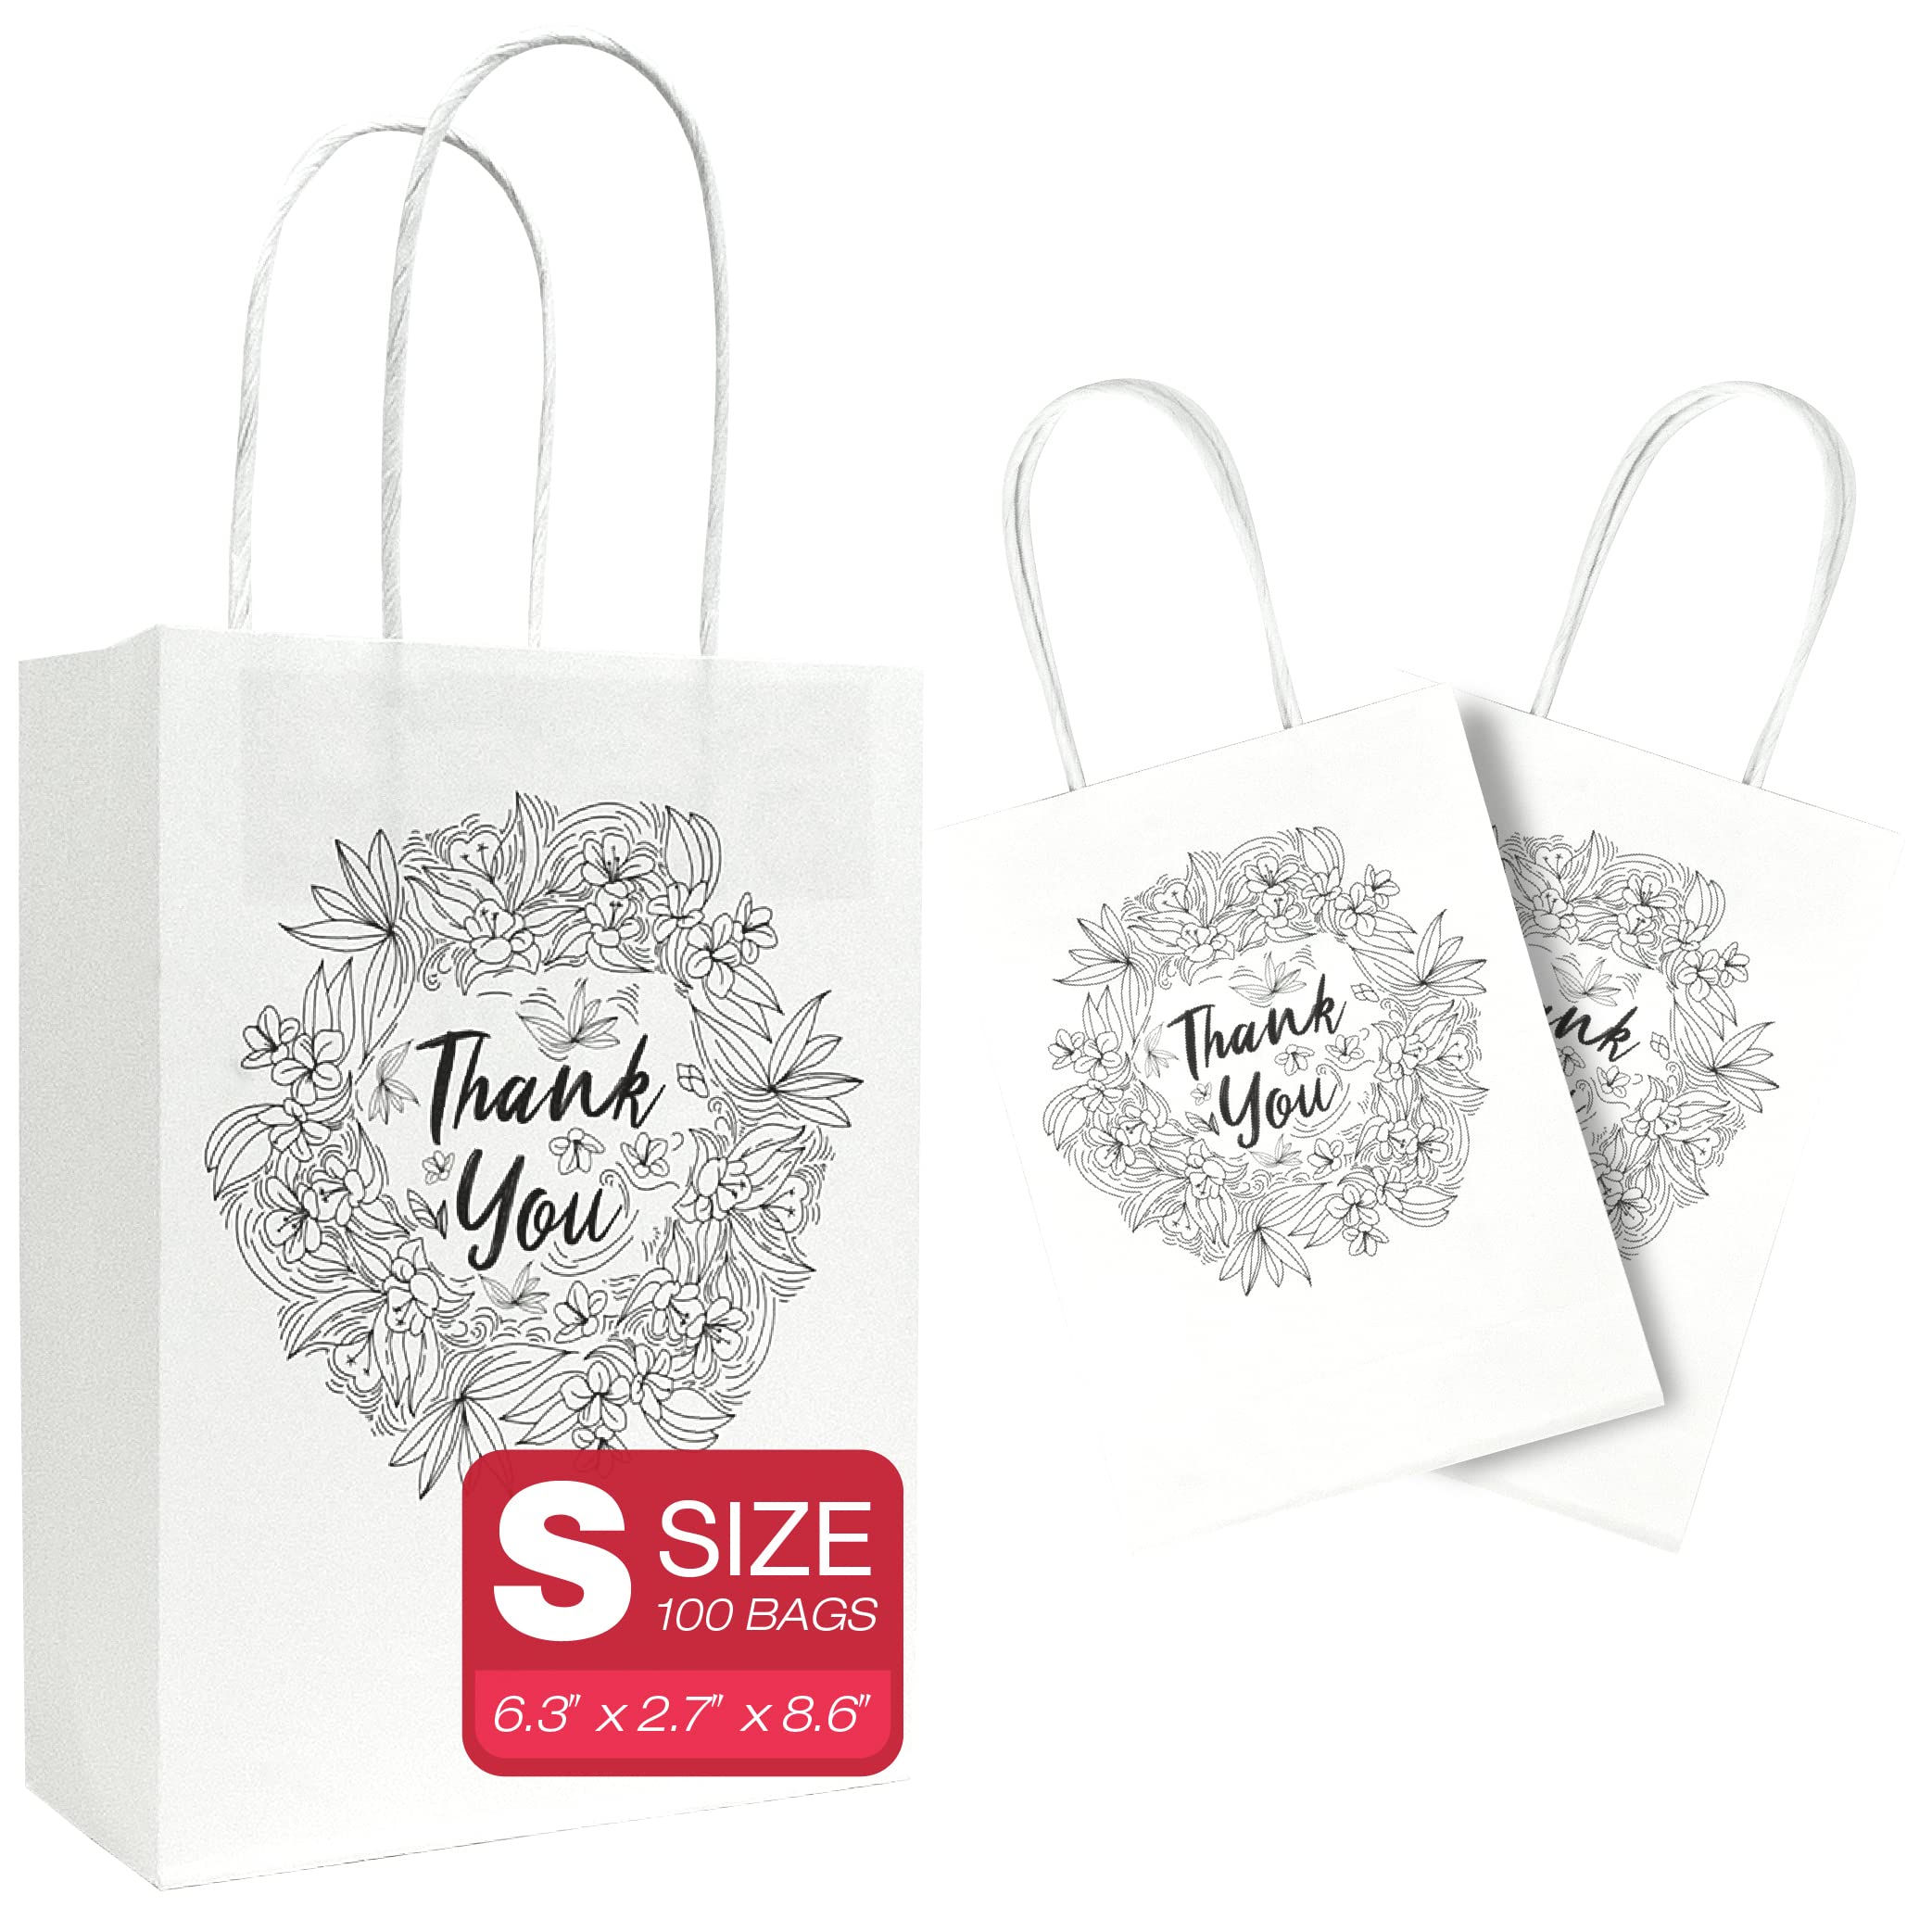 Small White Thank You Gift Bags for Small Business S Size100PCS by Tohoku Prime - 6.3x2.7x8.6 Floral Wreath Goody Bags